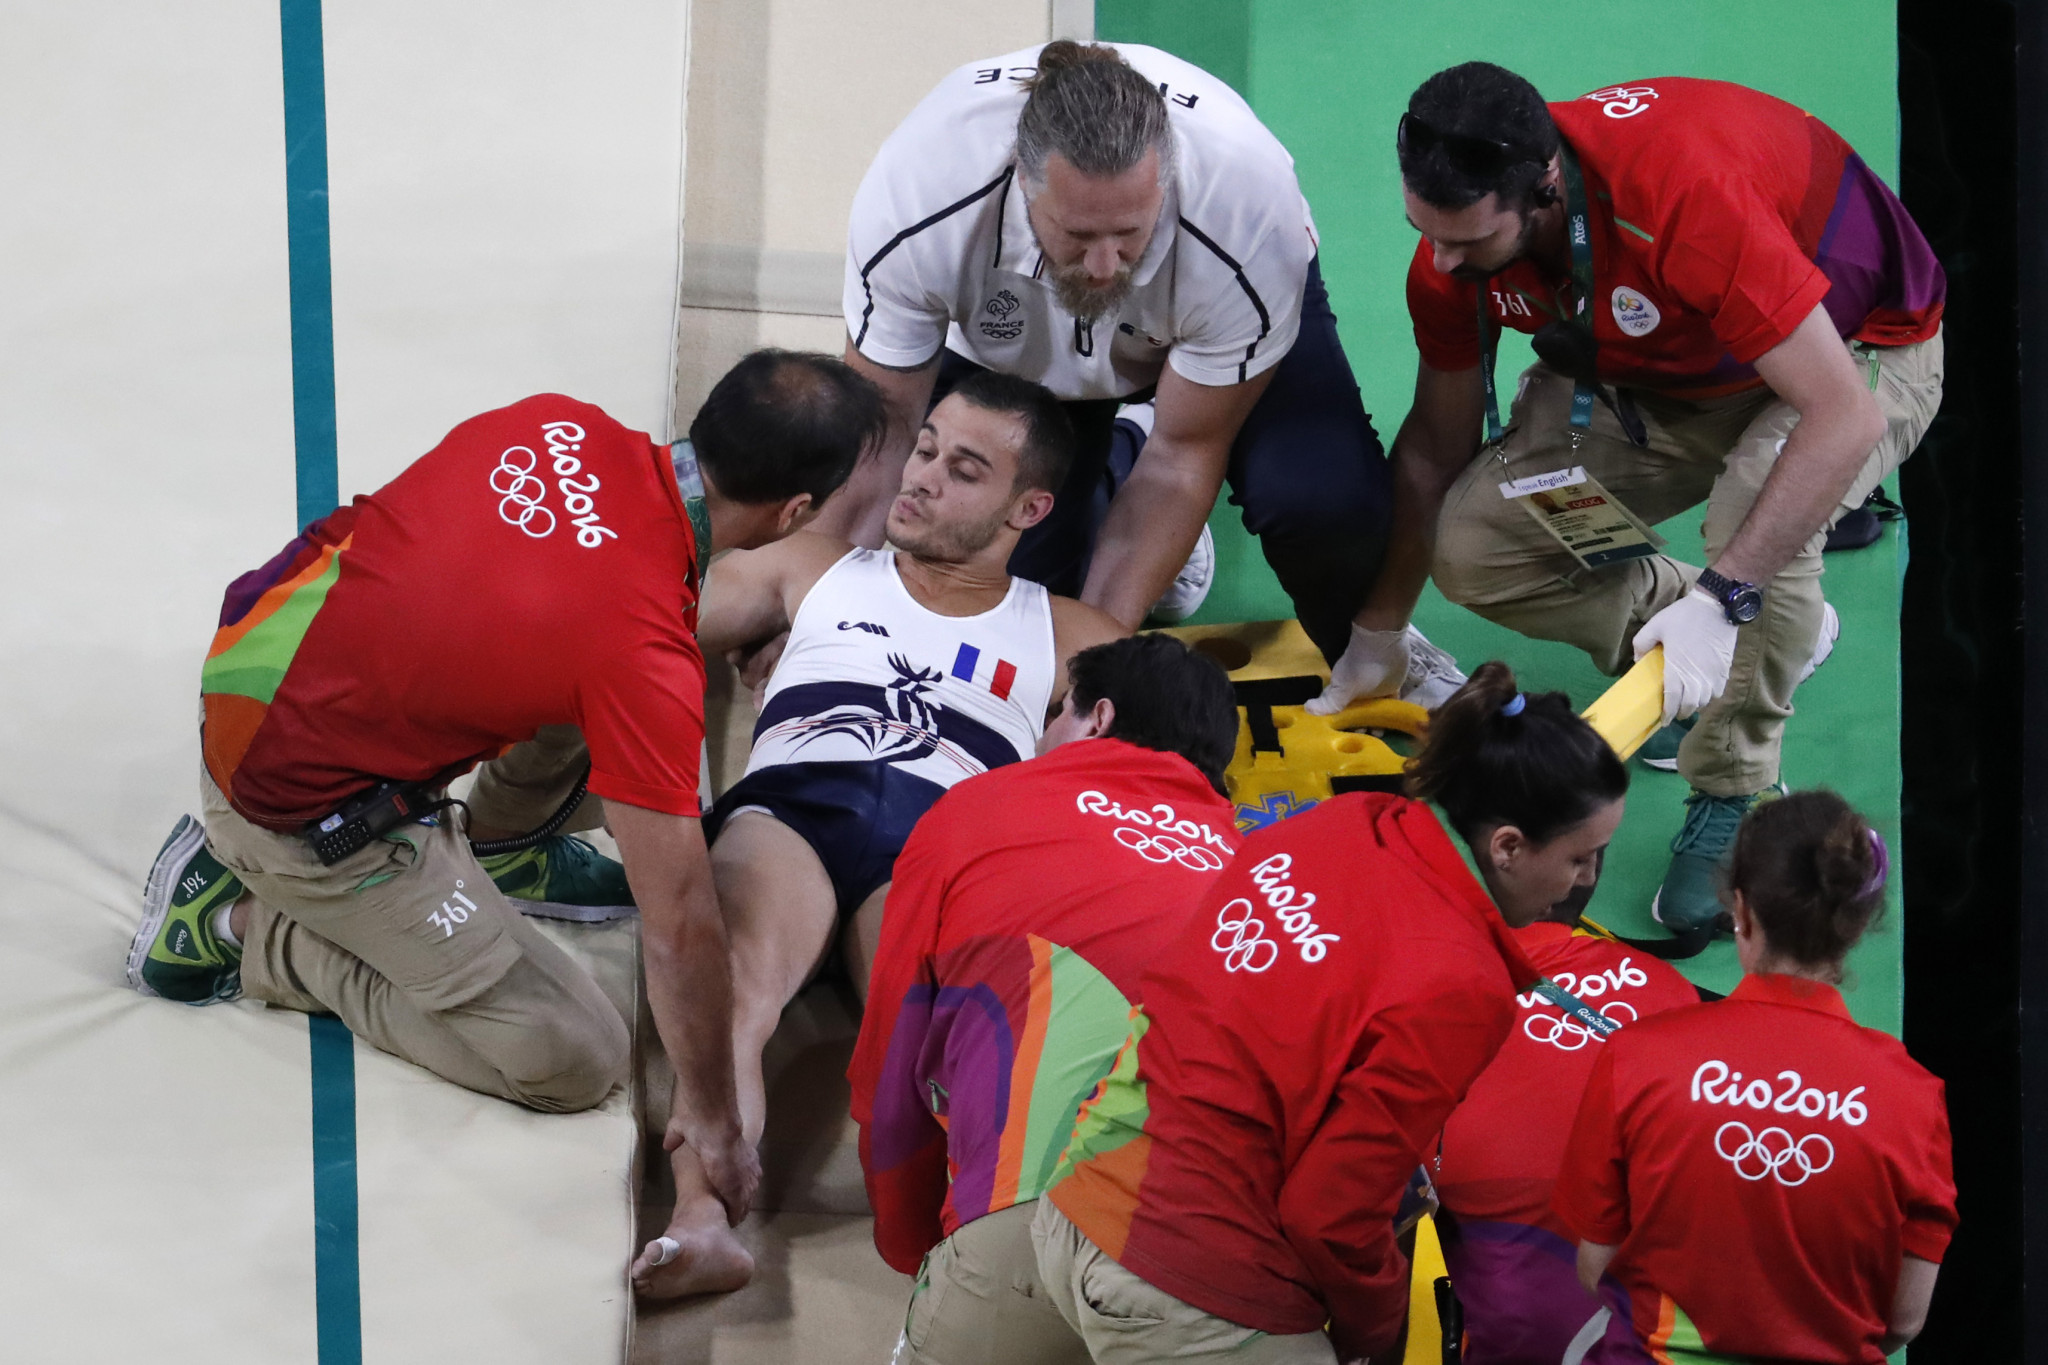 The Frenchman suffered an horrific leg injury at last year's Olympic Games in Rio ©Getty Images